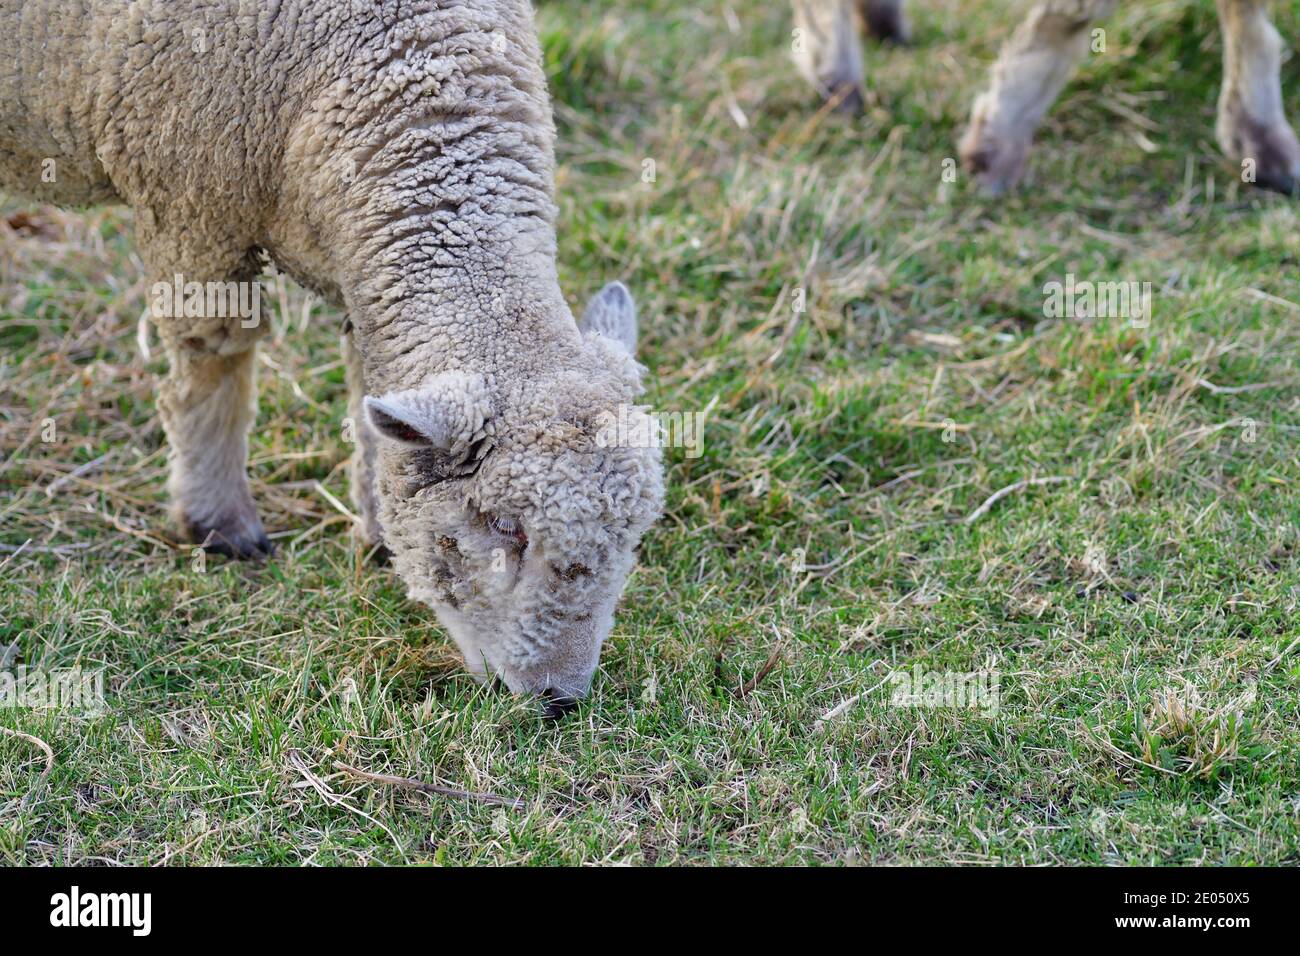 West Chicago, Illinois, USA. Sheep feeding on grass in a pasture on a working farm that is also a living history educational museum. Stock Photo